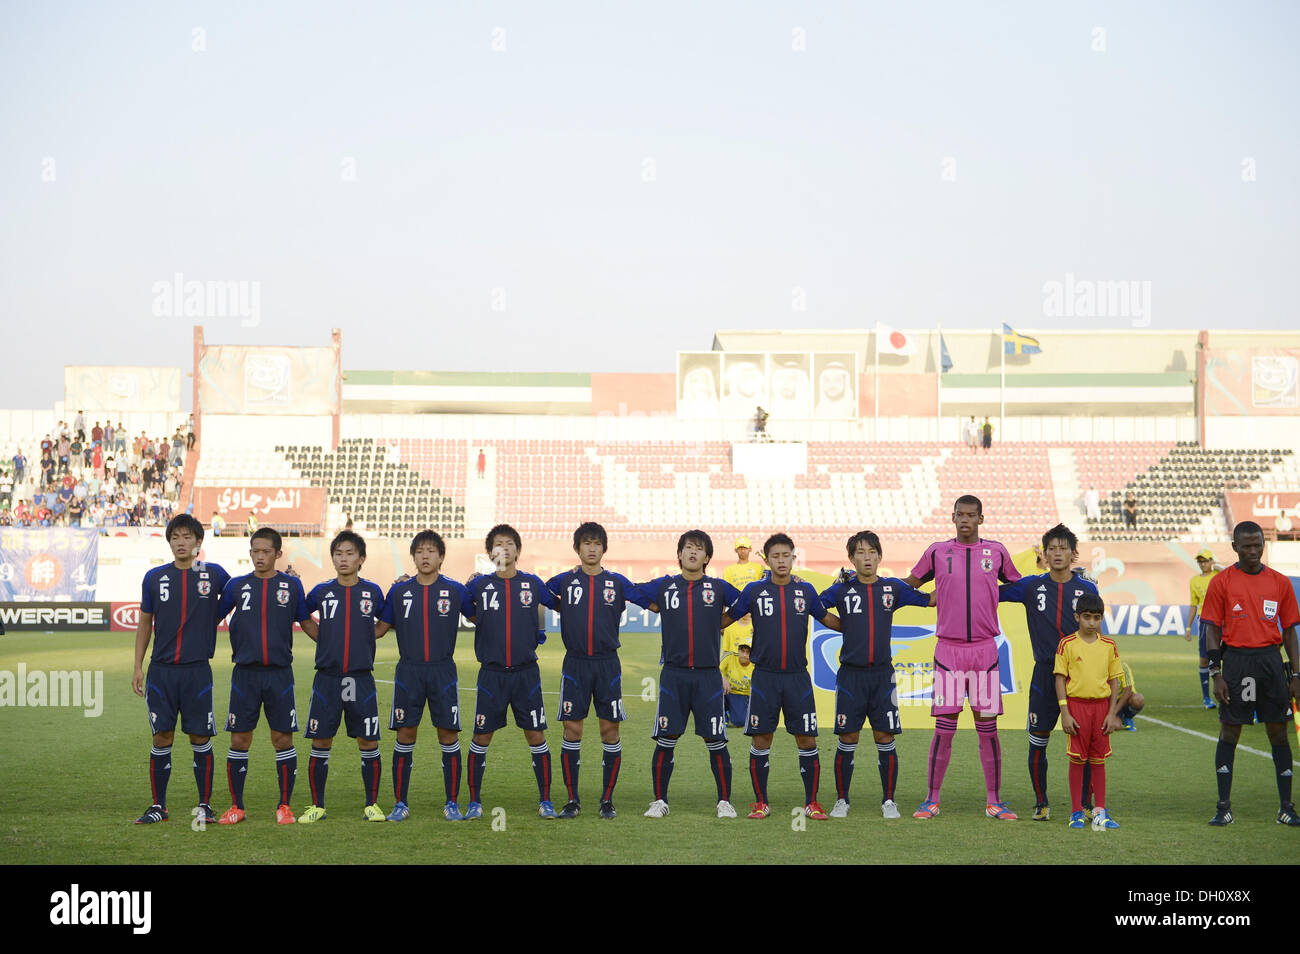 Sharjah, United Arab Emirates. 28th Oct, 2013. U-17Japan team group line-up (JPN) Football / Soccer : Players of Japan sing the national anthem before the FIFA U-17 World Cup UAE 2013 Round of 16 match between Japan 1-2 Sweden at Sharjah Stadium in Sharjah, United Arab Emirates . © FAR EAST PRESS/AFLO/Alamy Live News Stock Photo